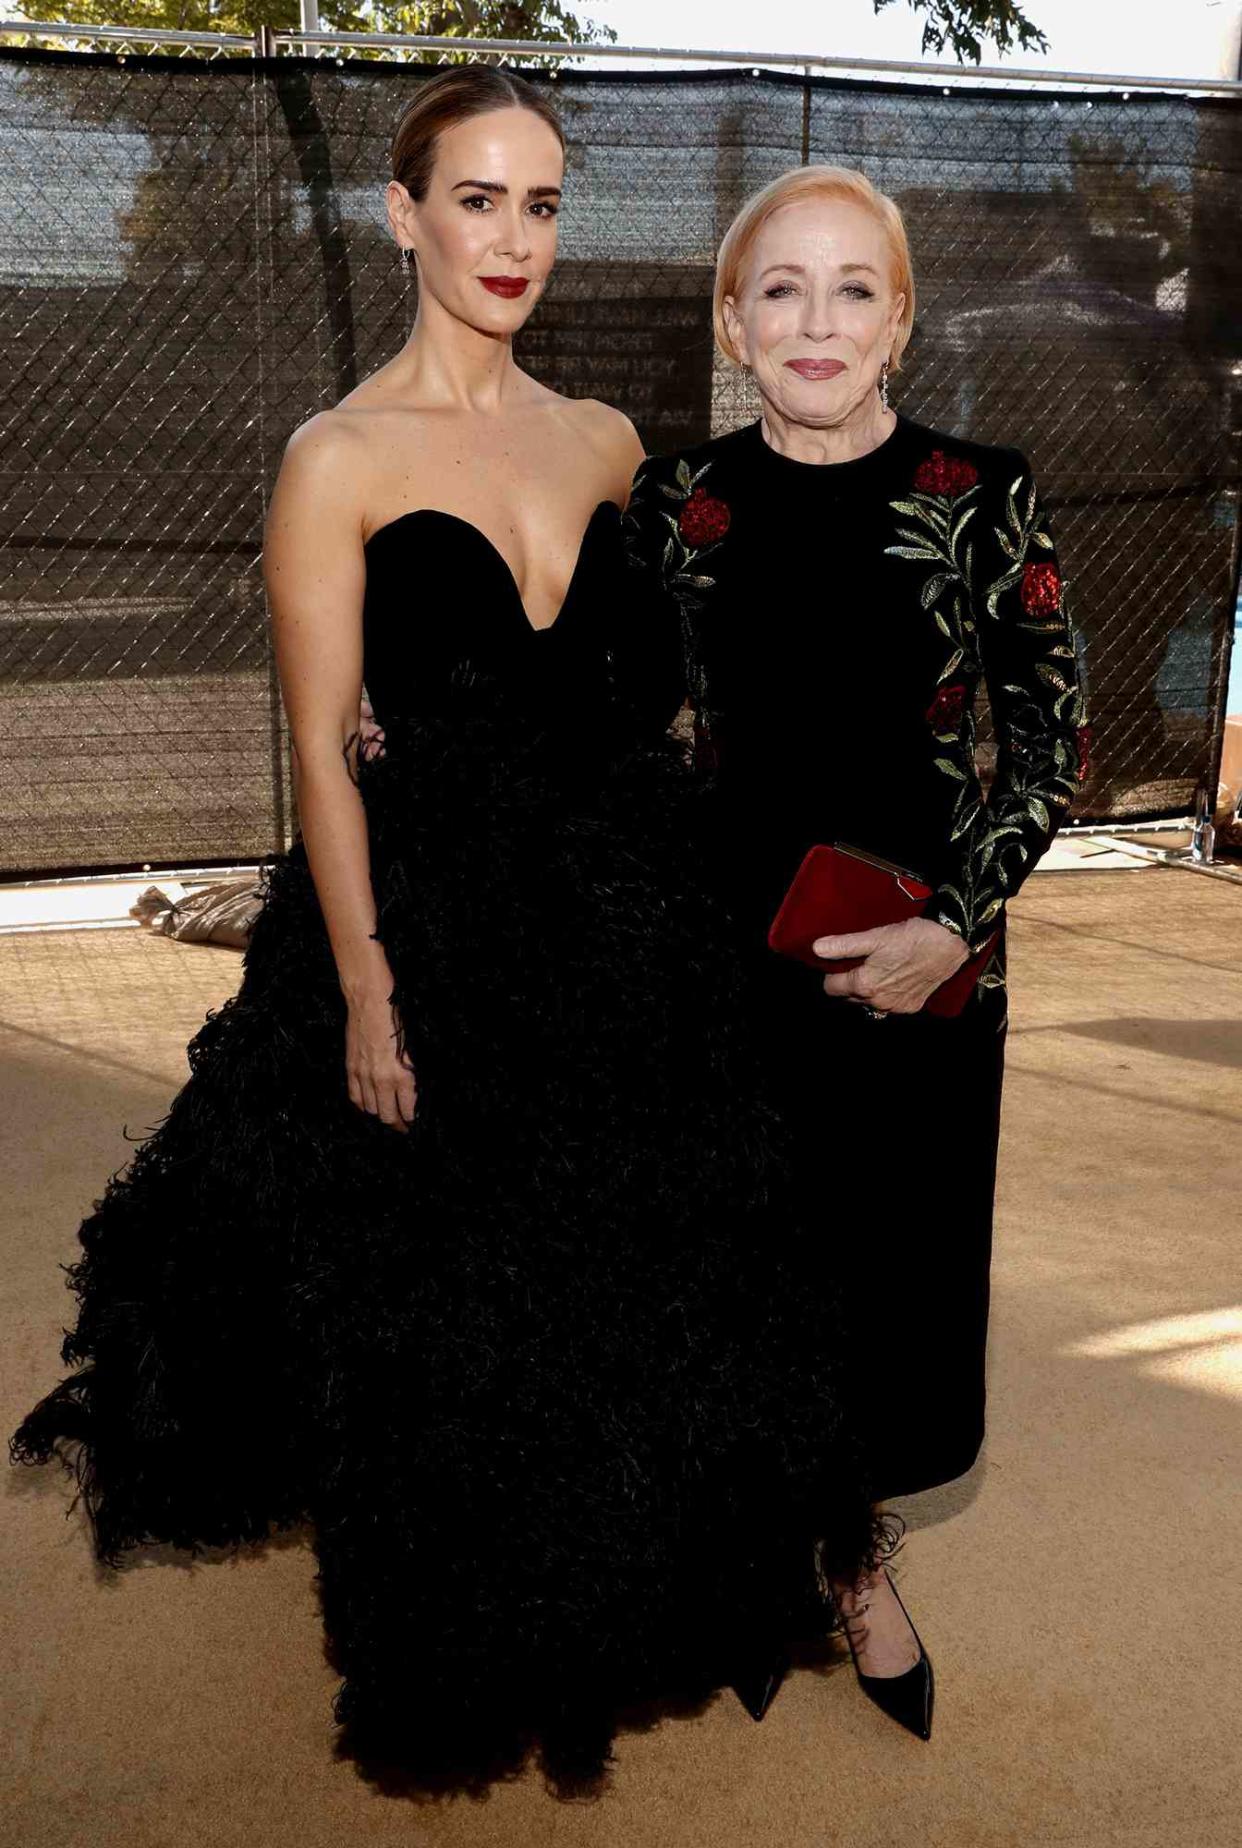 Sarah Paulson and Holland Taylor arrive to the 70th Annual Primetime Emmy Awards held at the Microsoft Theater on September 17, 2018. NUP_184218